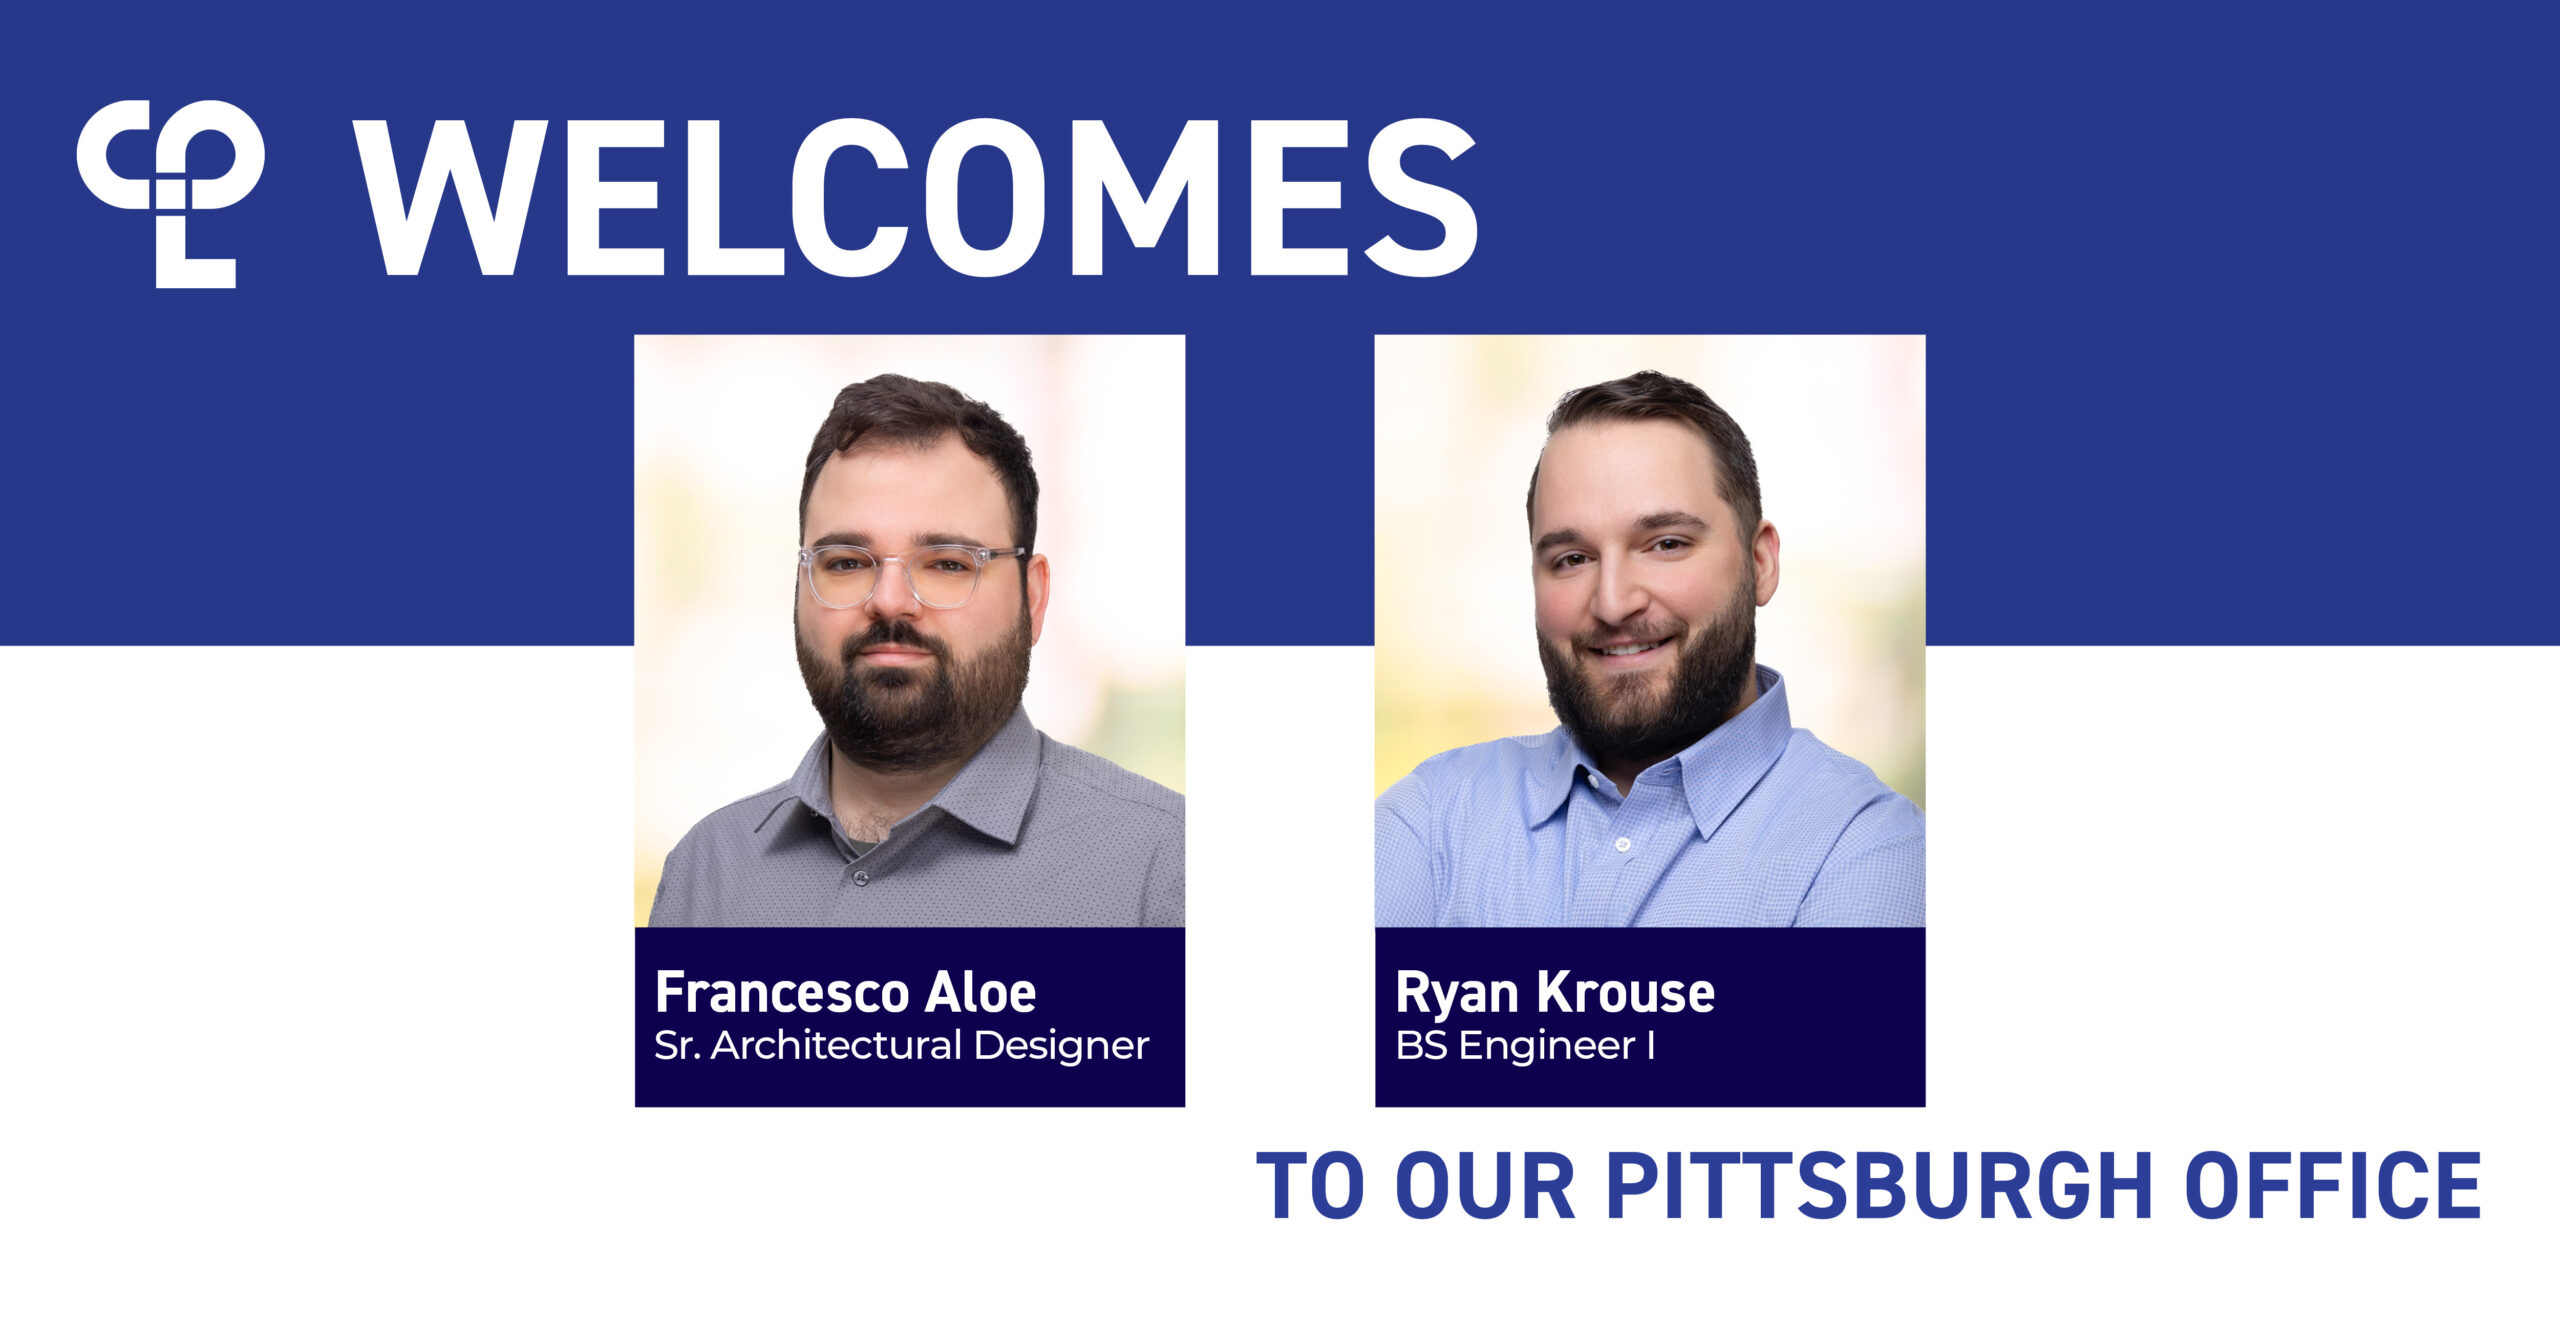 CPL welcomes Francesco Aloe and Ryan Krouse to its team in Pittsburgh